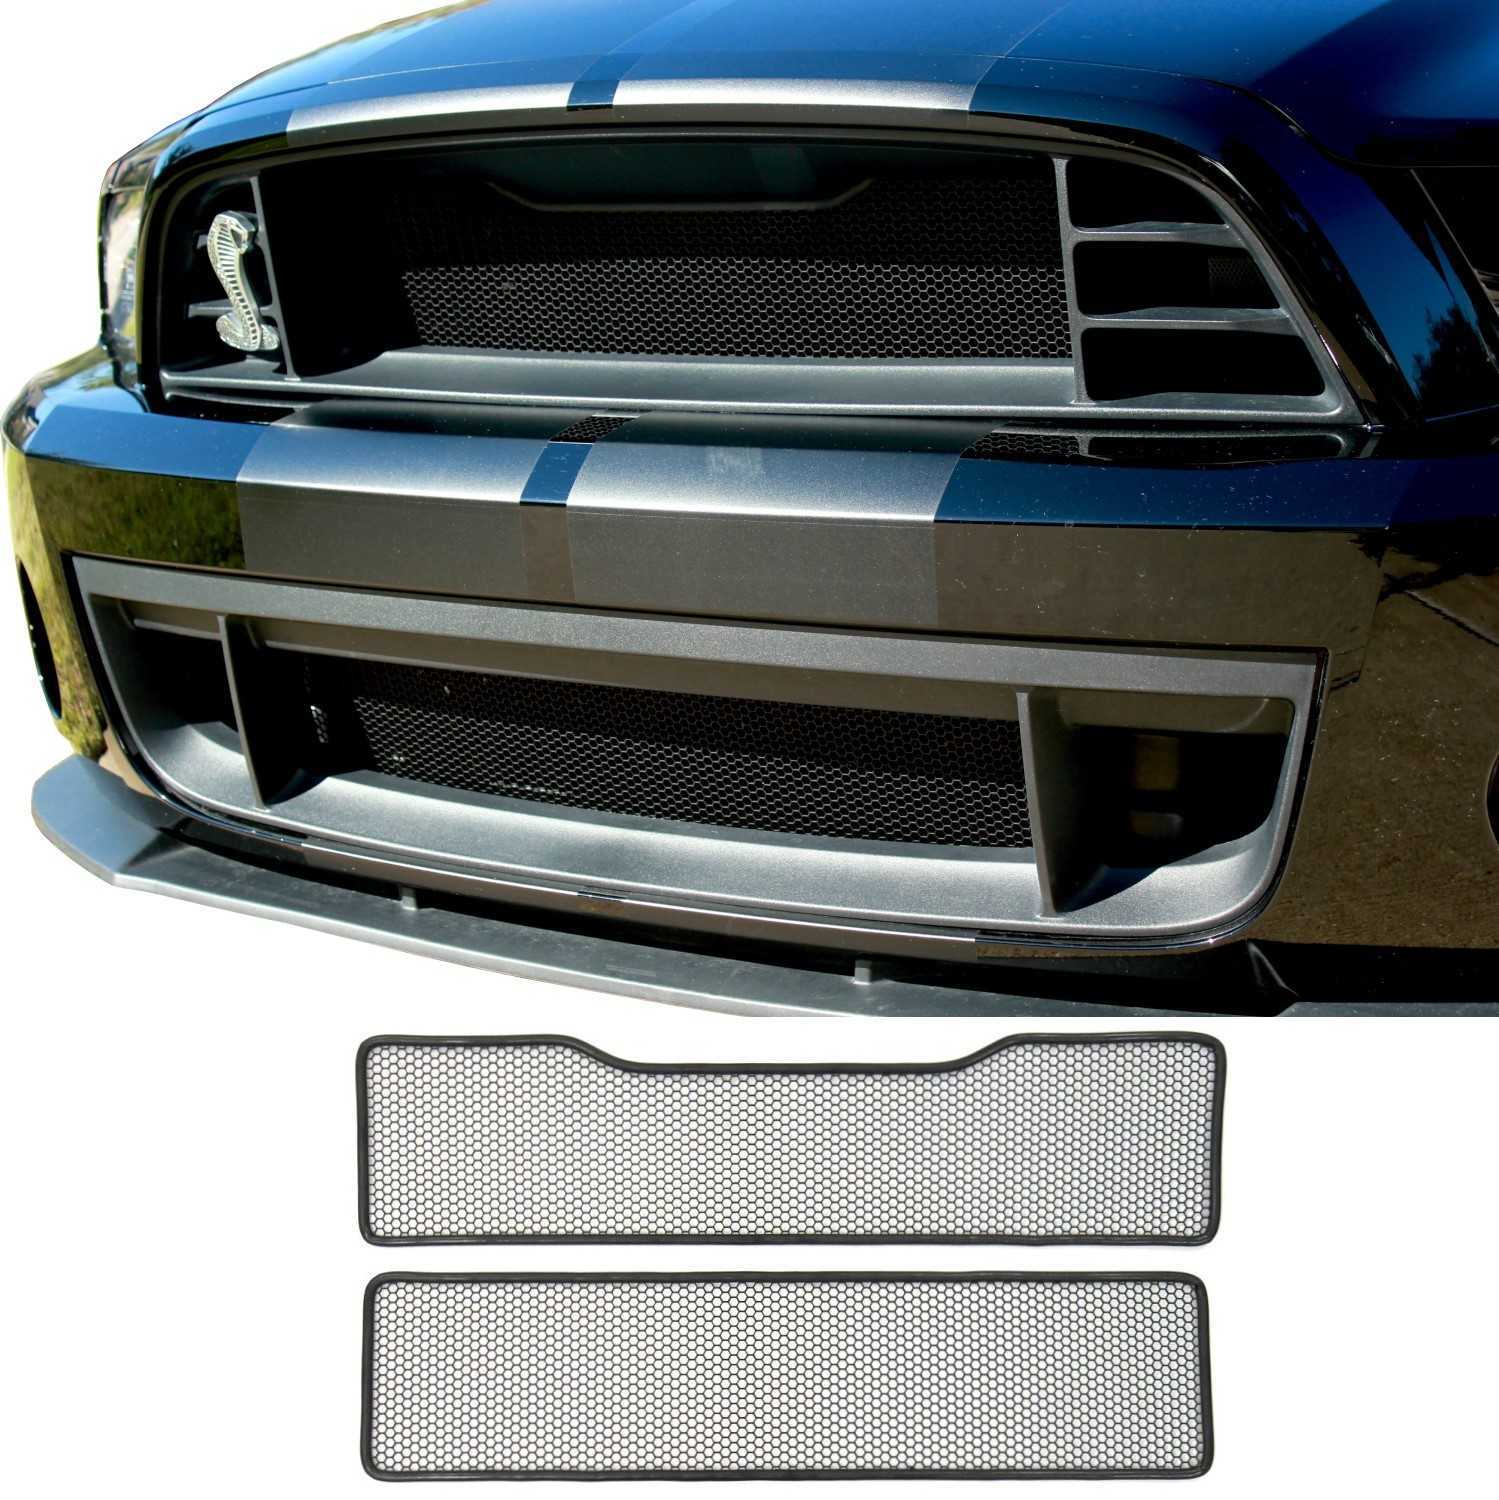 Mesh Grill Kit for 2013 - 2014 Ford Mustang GT500